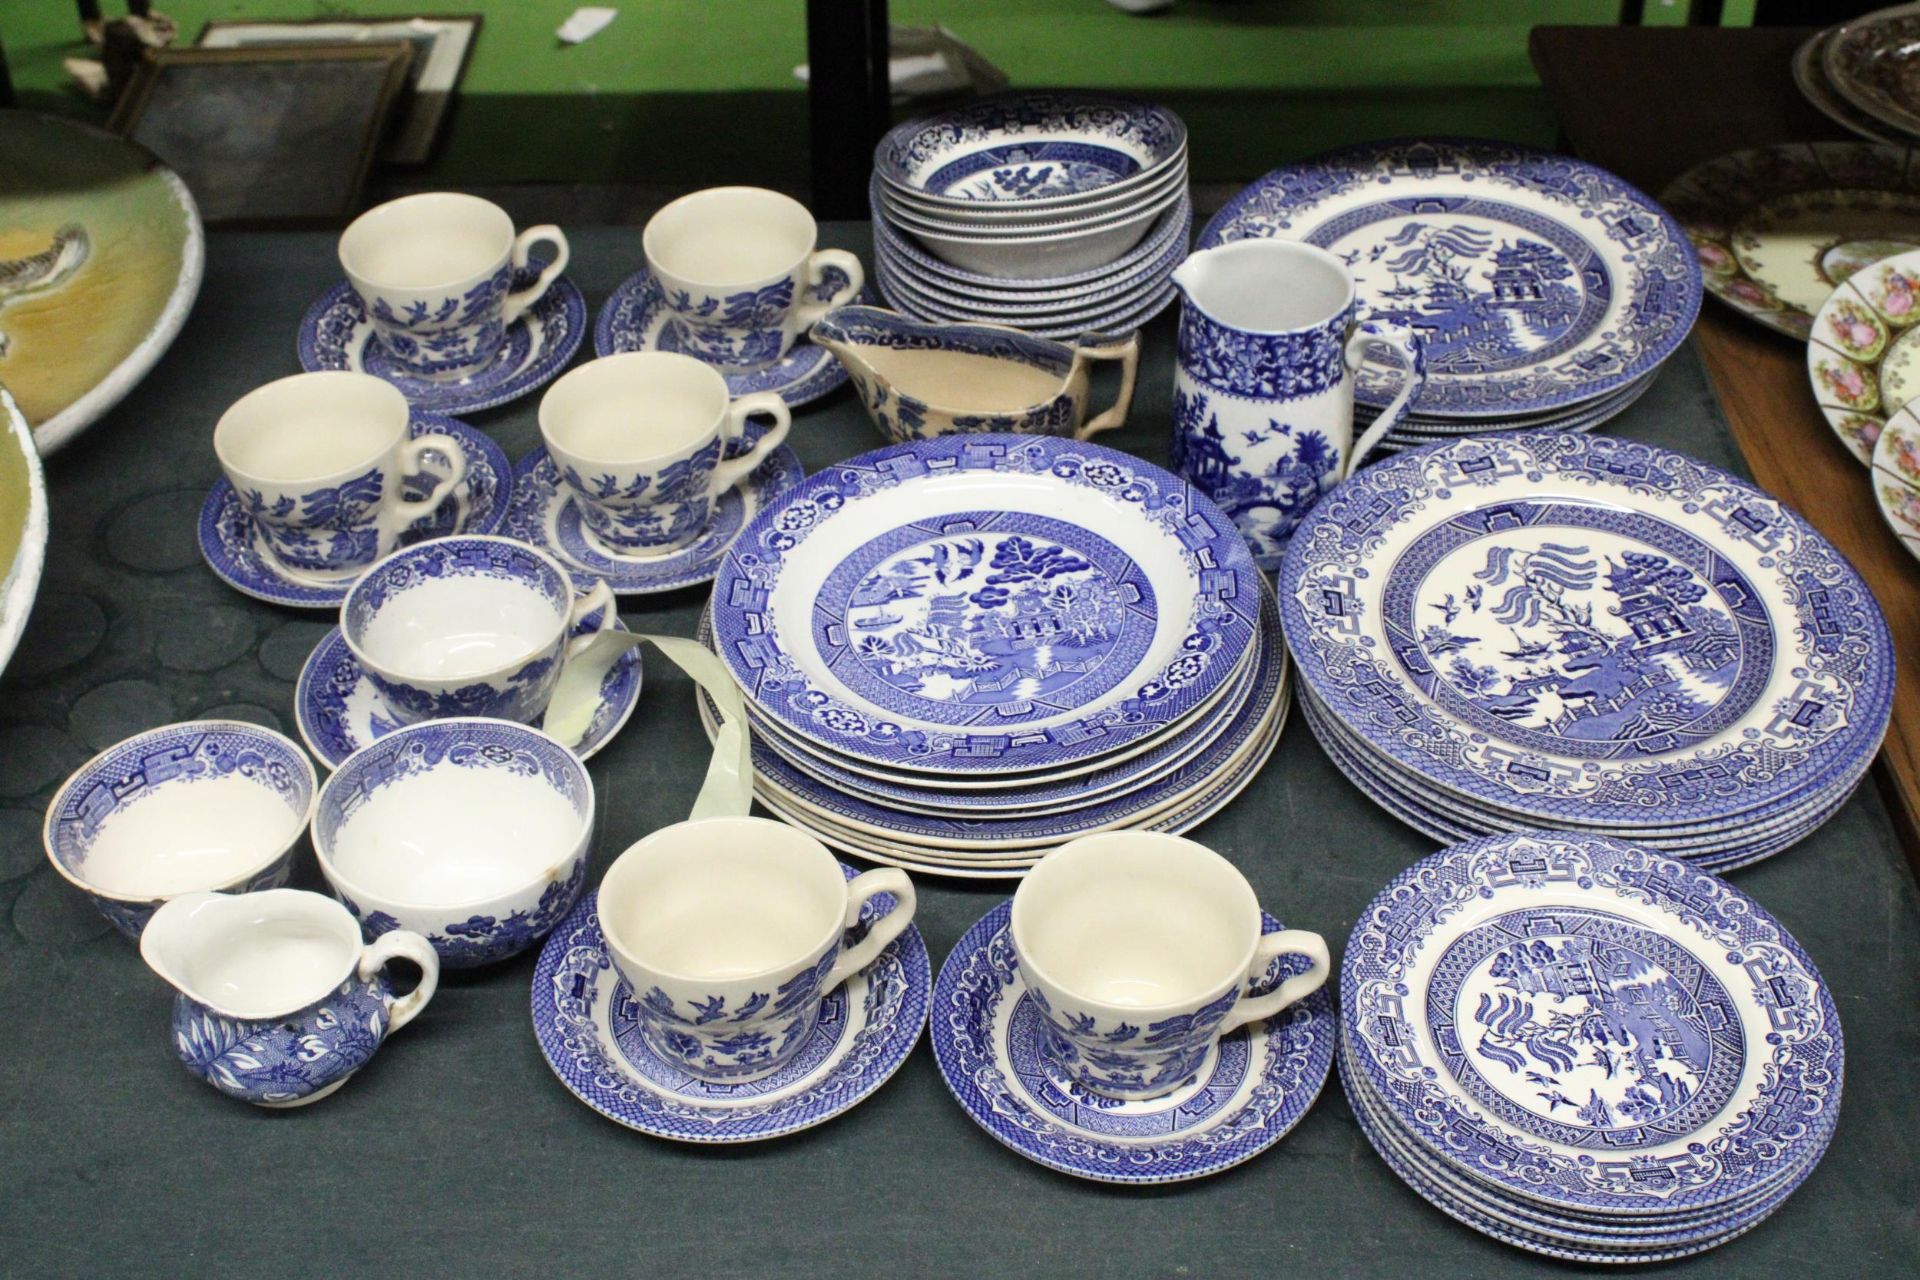 A QUANTITY OF BLUE AND WHITE WILLOW PATTERN DINNERWARE TO INCLUDE VARIOUS SIZES OF PLATES, BOWLS,